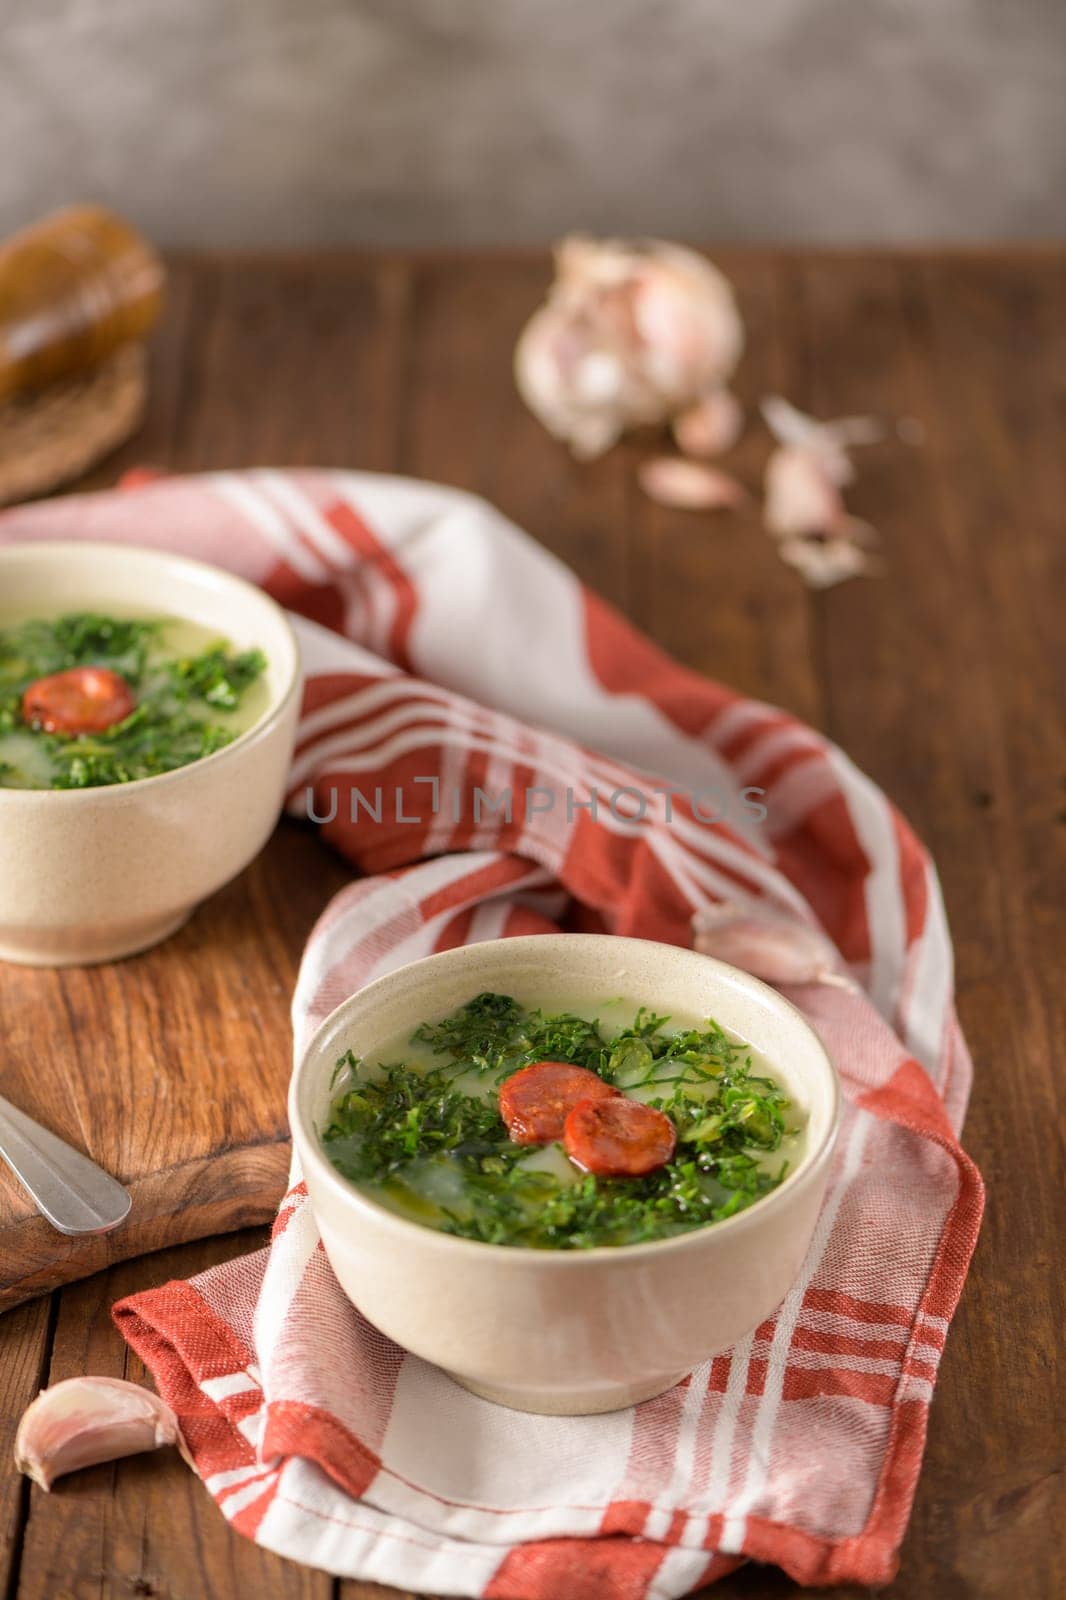 Caldo verde popular soup in Portuguese cuisine. traditional ingredients for caldo verde are potatoes, collard greens , olive oil and salt. Additionally garlic or onion may be added.